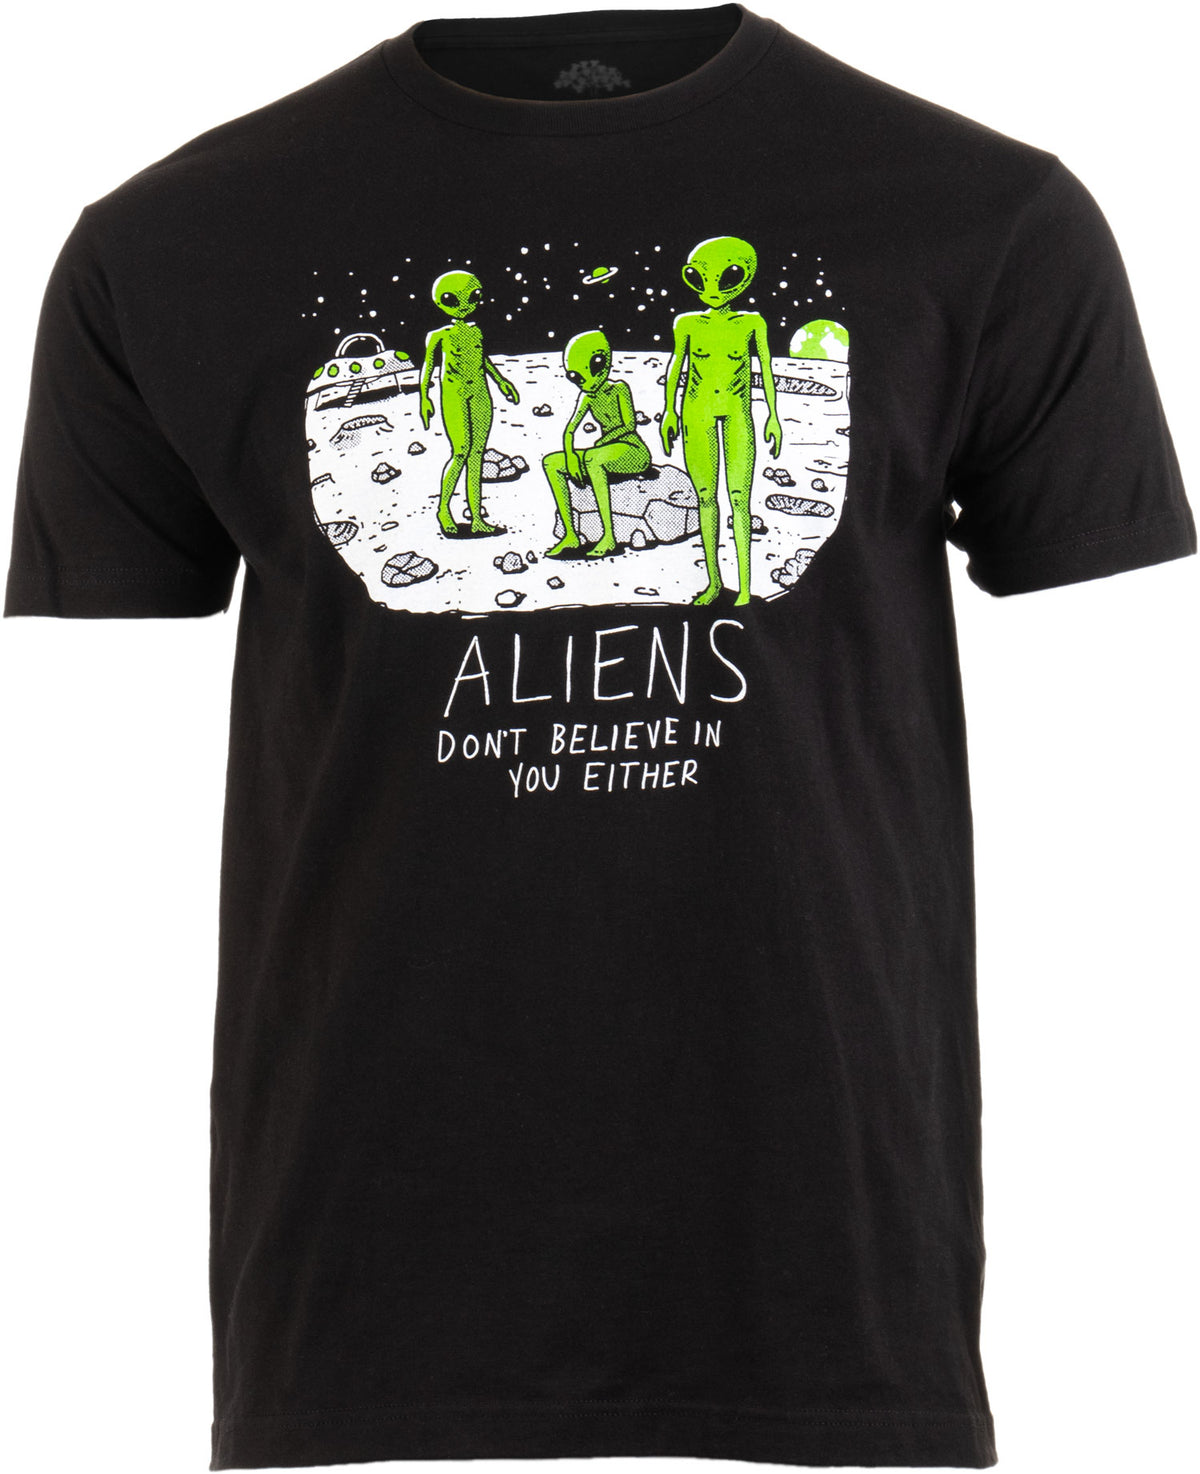 Aliens Don't Believe in You, Either | Funny UFO Hunter Space T-shirt - Men's/Unisex